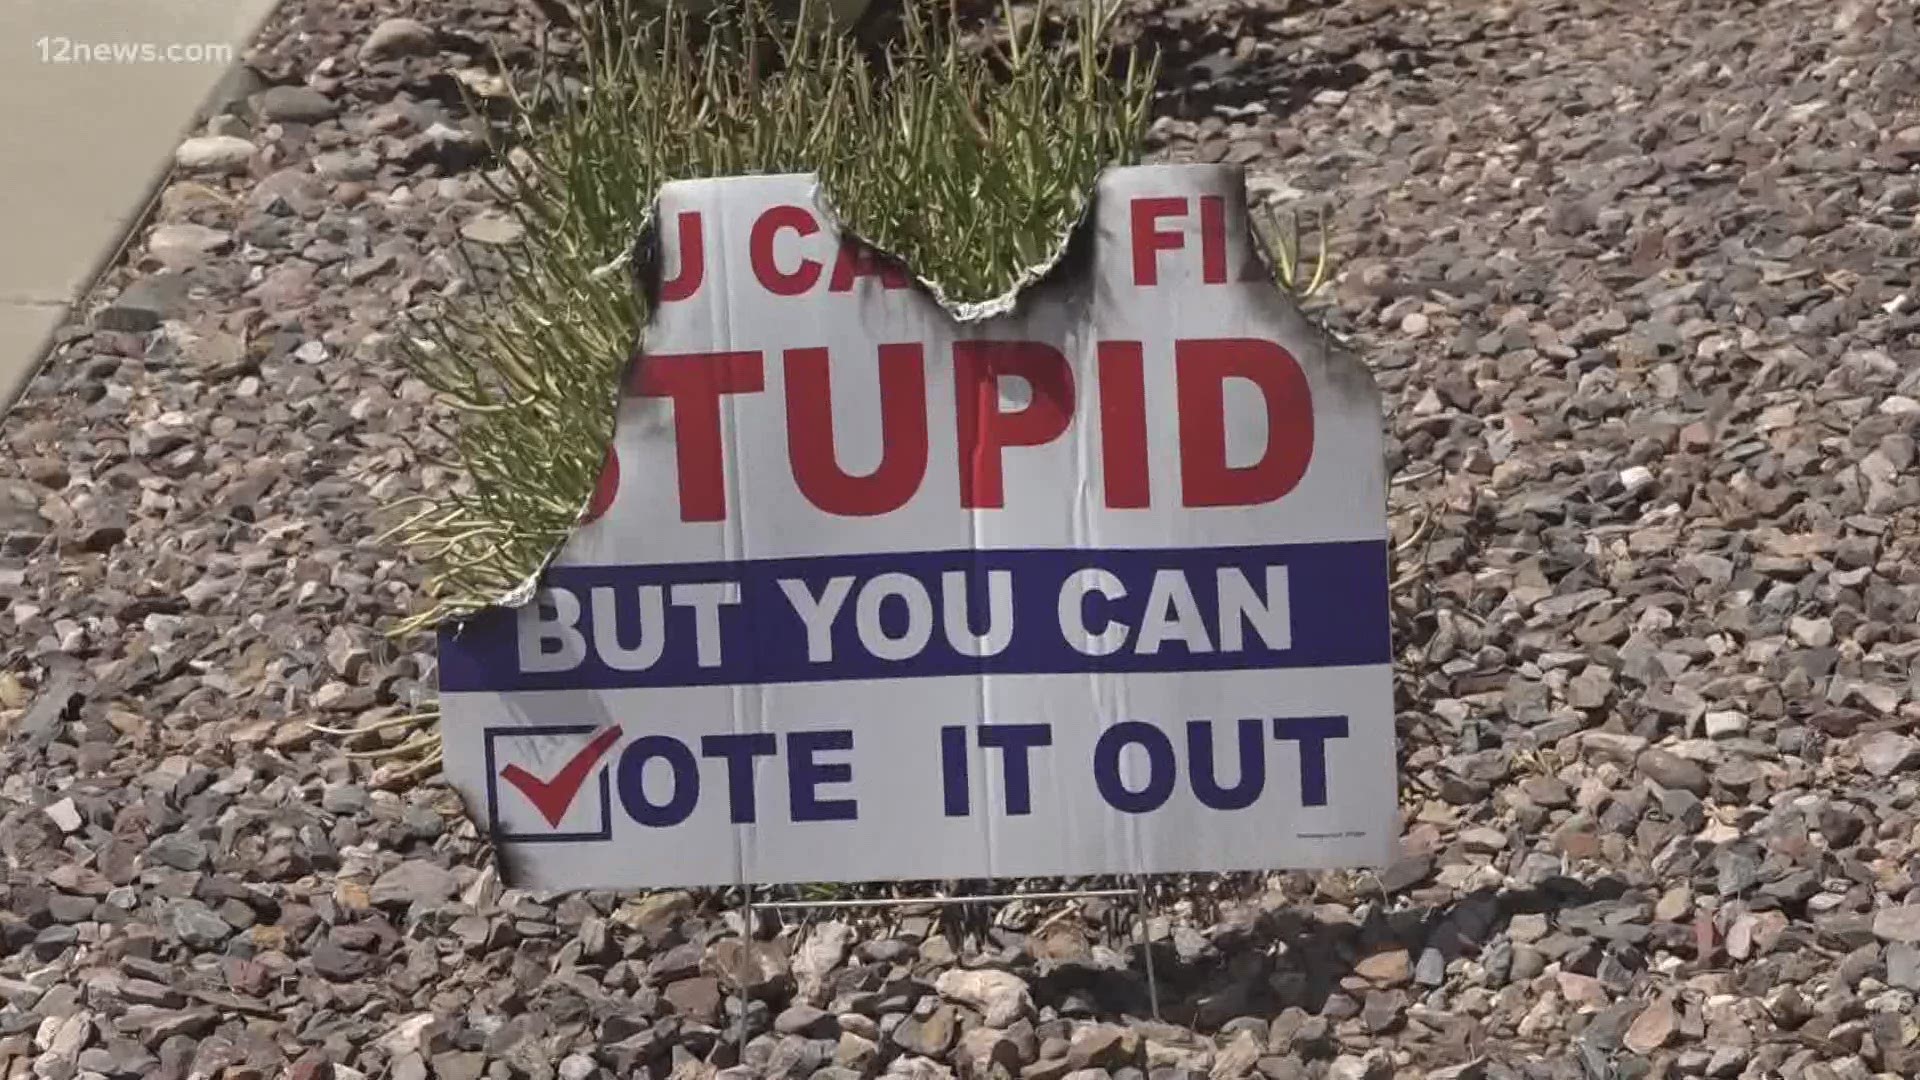 Plenty of people are showing support for their favorite candidate by displaying signs in their yard. But that battle just got personal in an Anthem neighborhood.